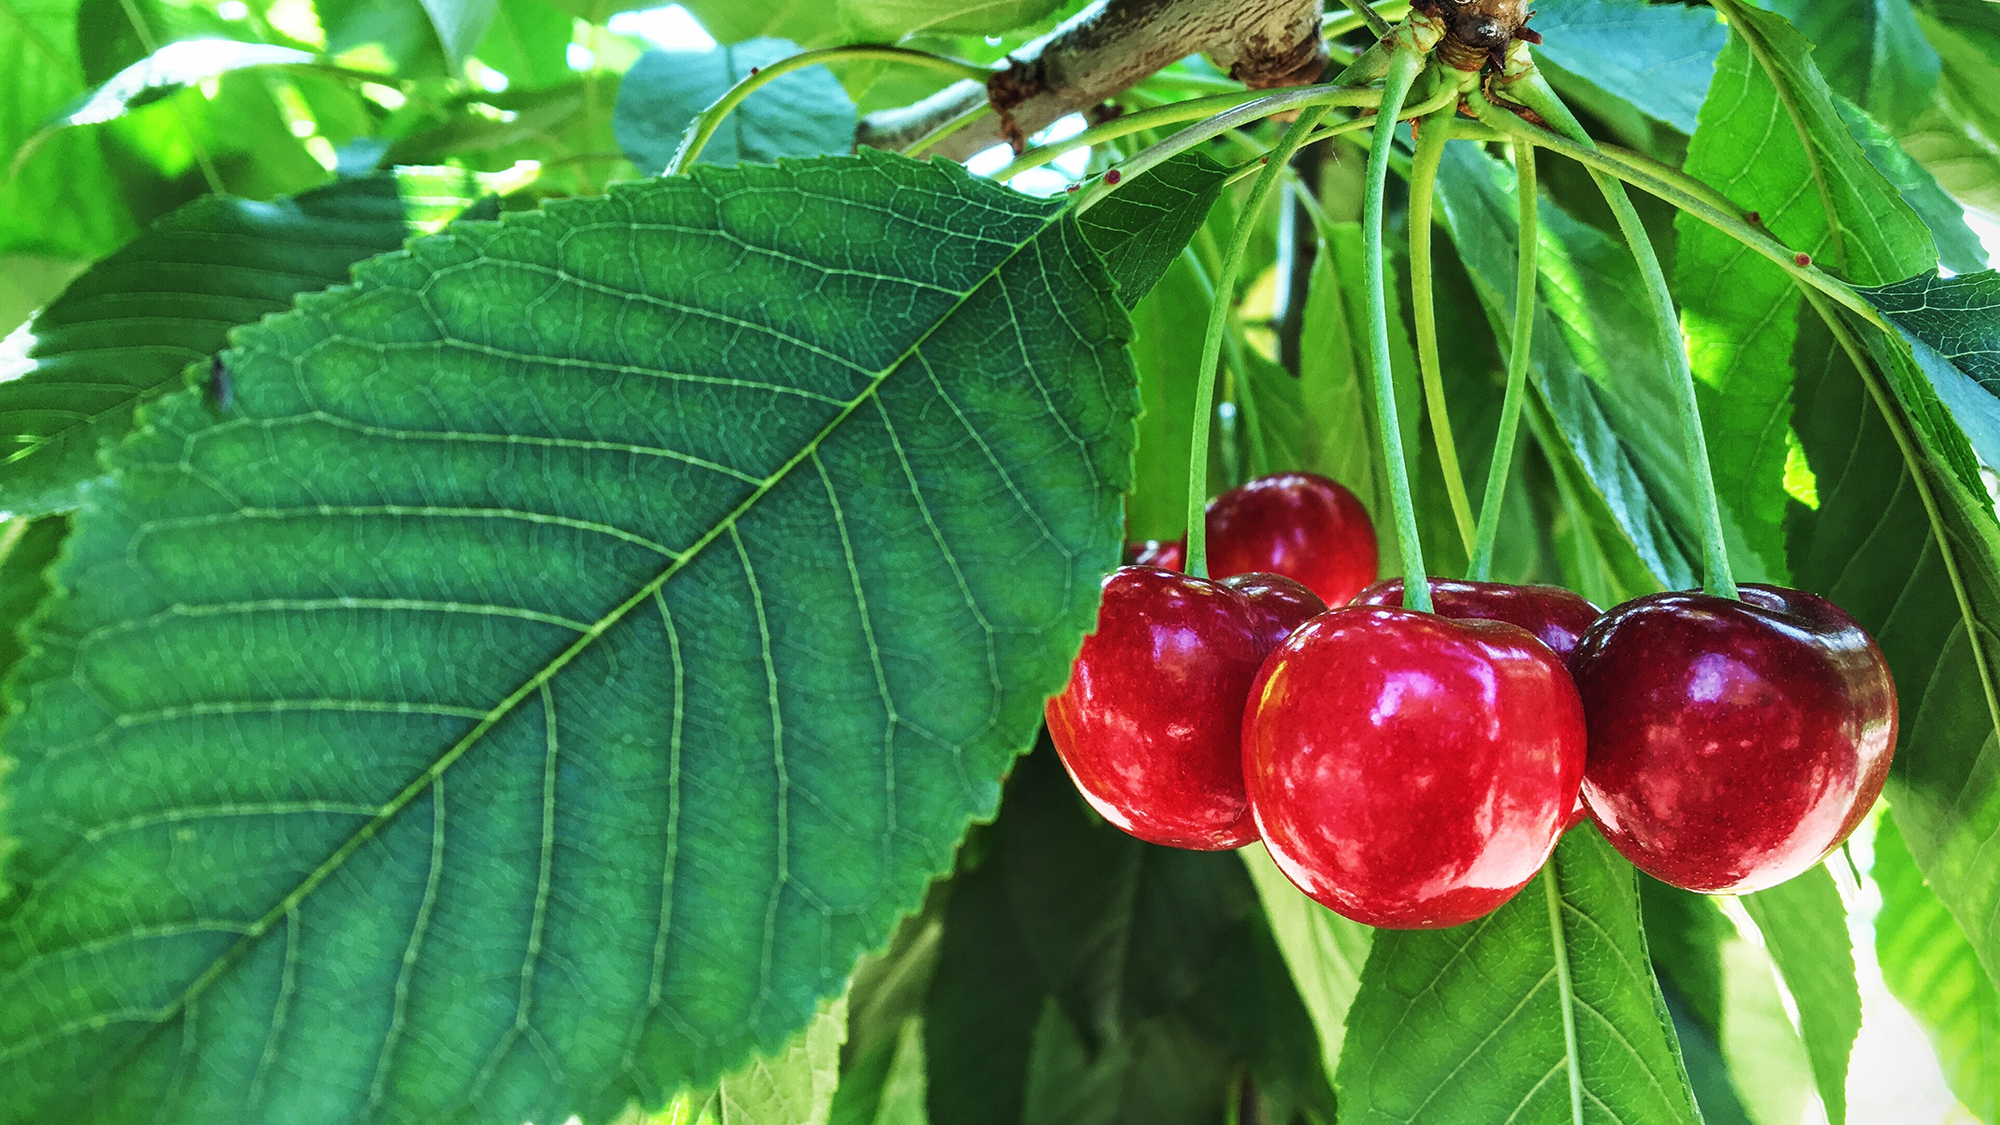 Growing Cherry Trees: Planting Cherry Trees In Your Garden